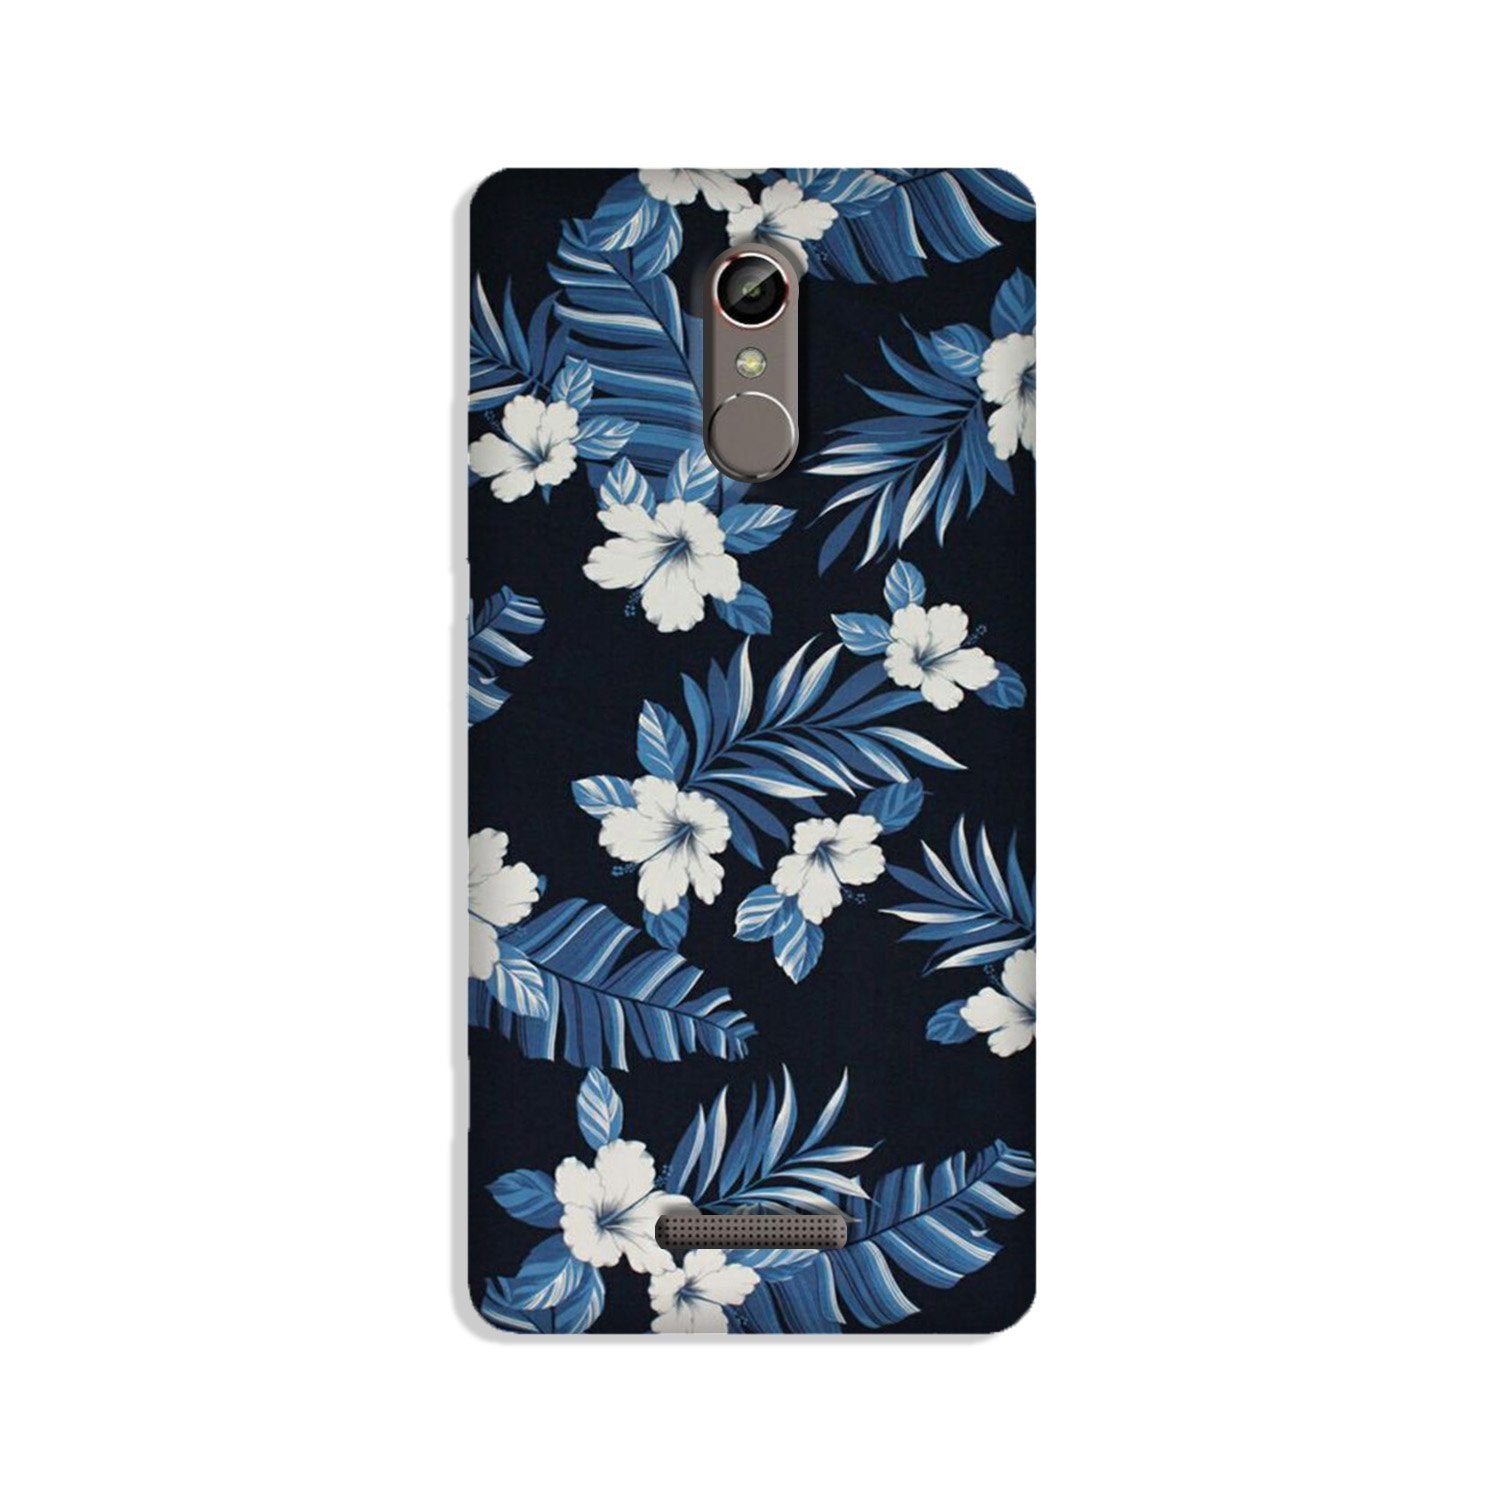 White flowers Blue Background2 Case for Gionee S6s